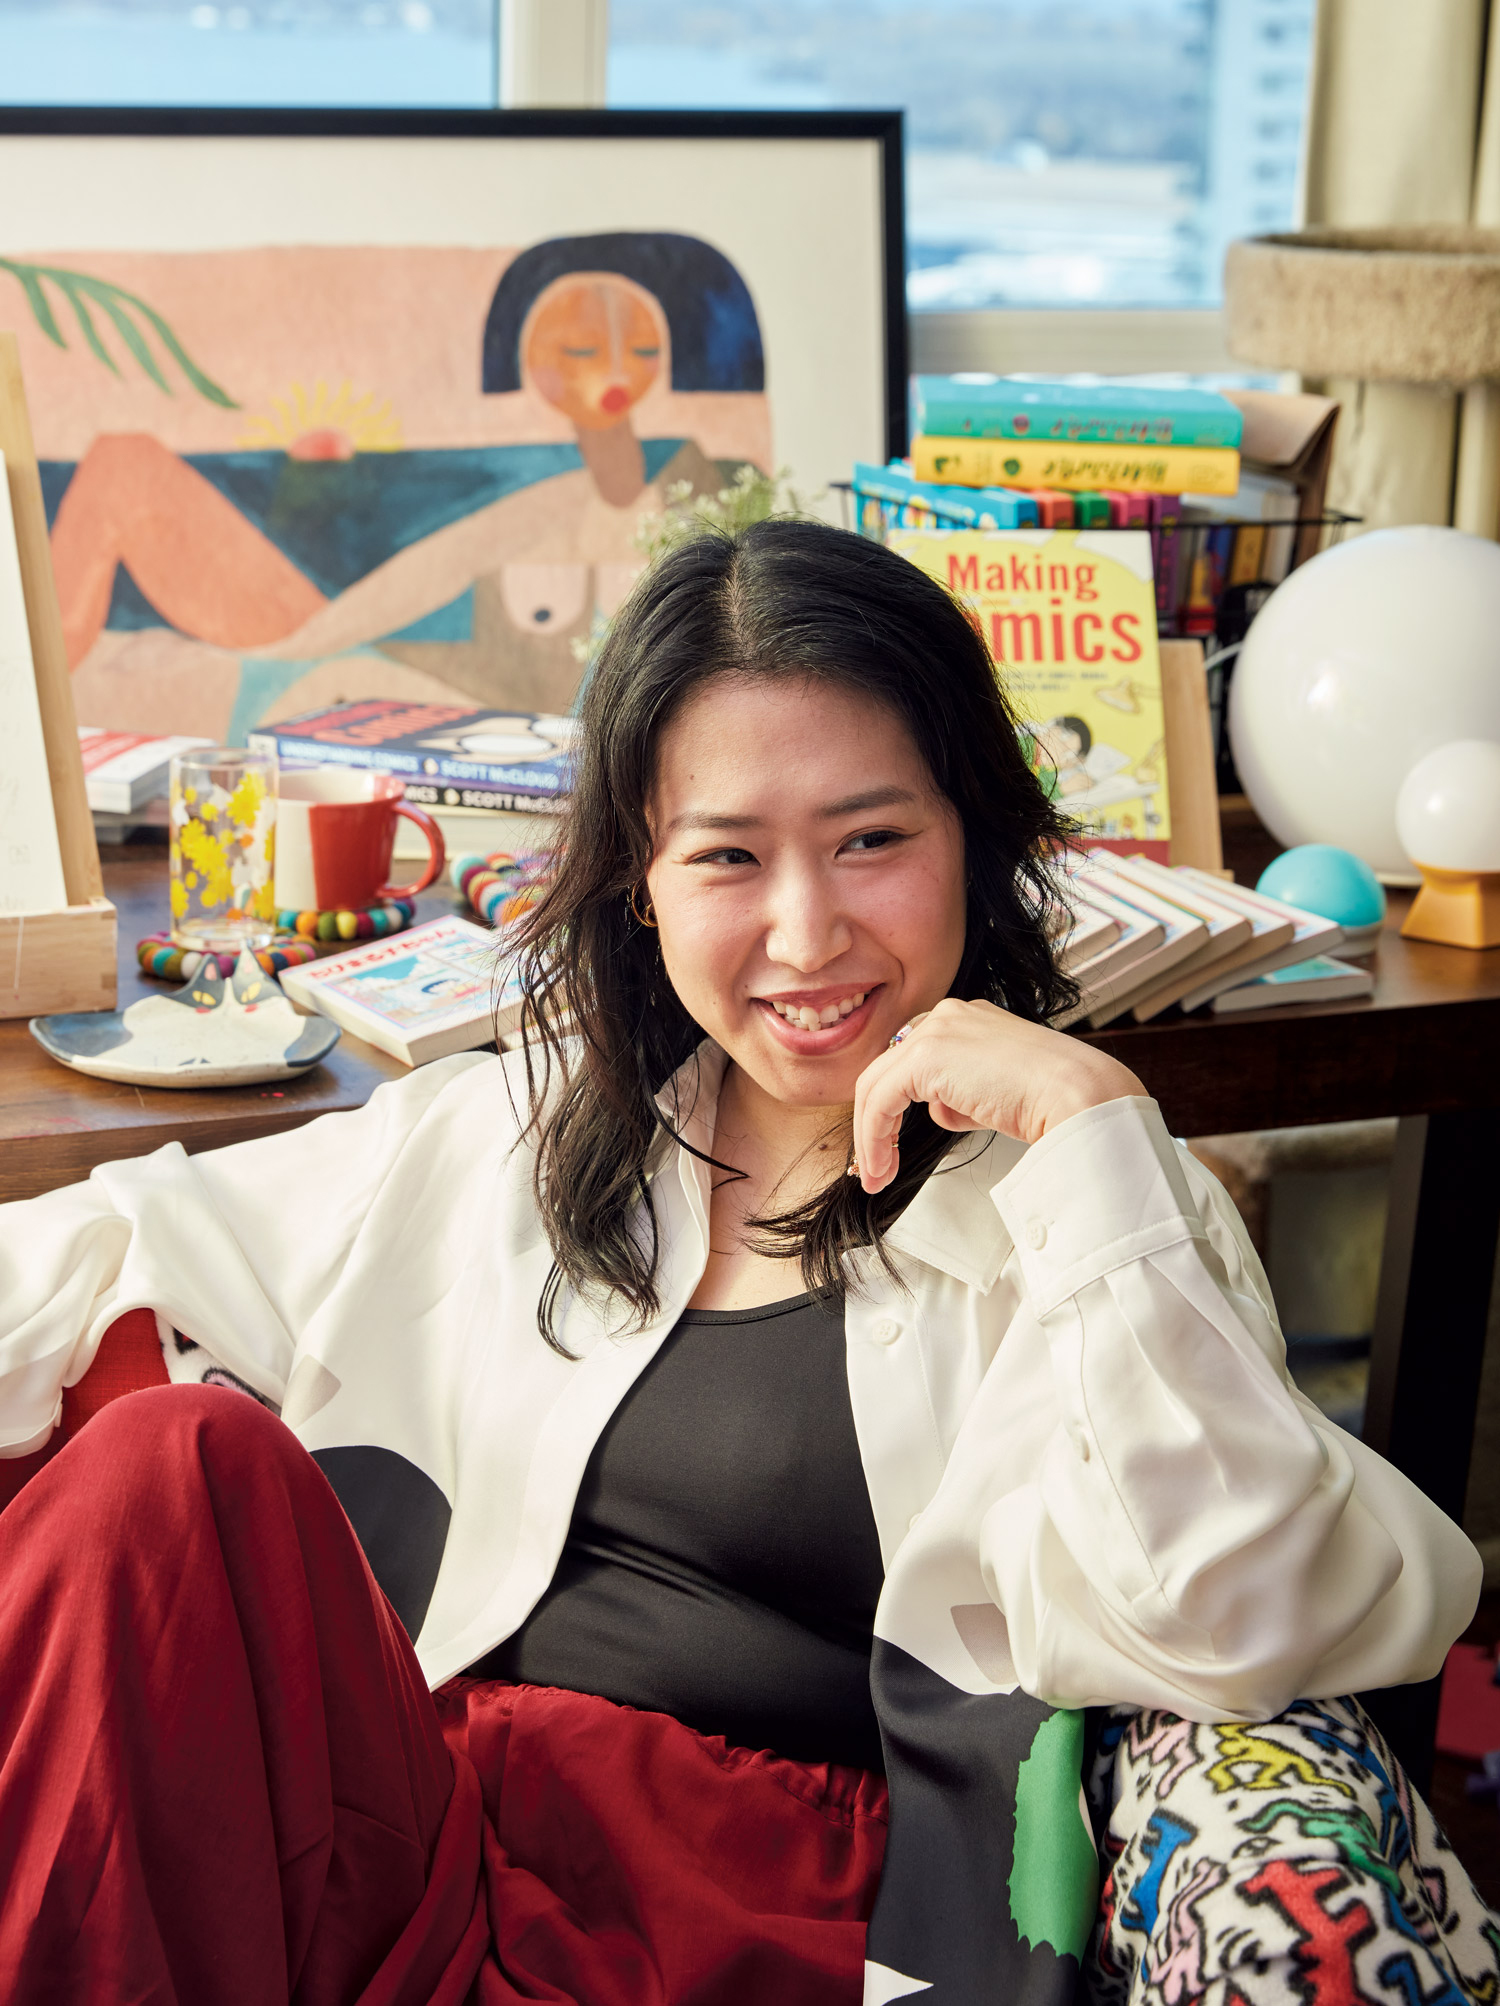 Professor Ai Taniguchi, wearing an open white button-up shirt over a black tank top and baggy red pants. She is sitting in an armchair, with an elbow against one arm of the chair, which is lined with a Keith Haring throw blanket. Behind her is a table full of books.